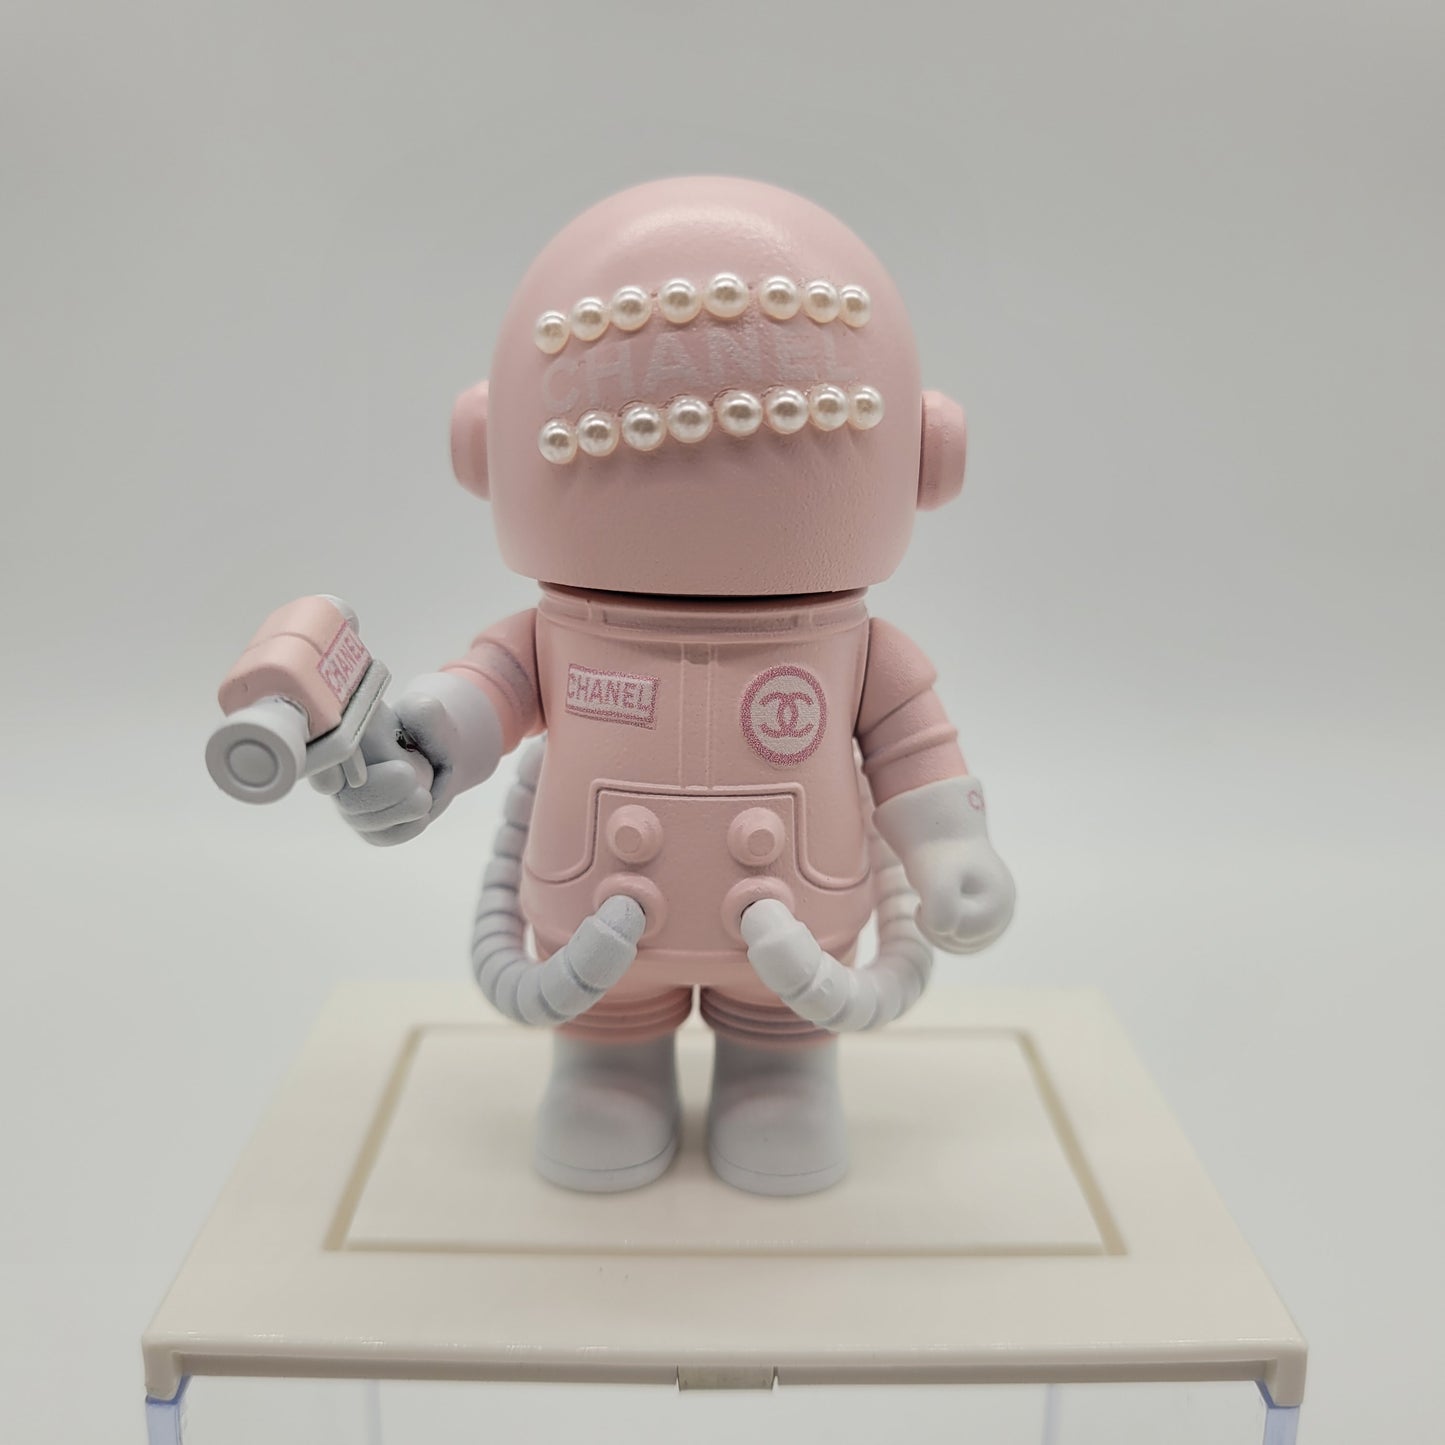 POPMART 100% Space Molly Artistic Adaptation by Myz Studio with Acrylic Display Case (PINK) 1pc